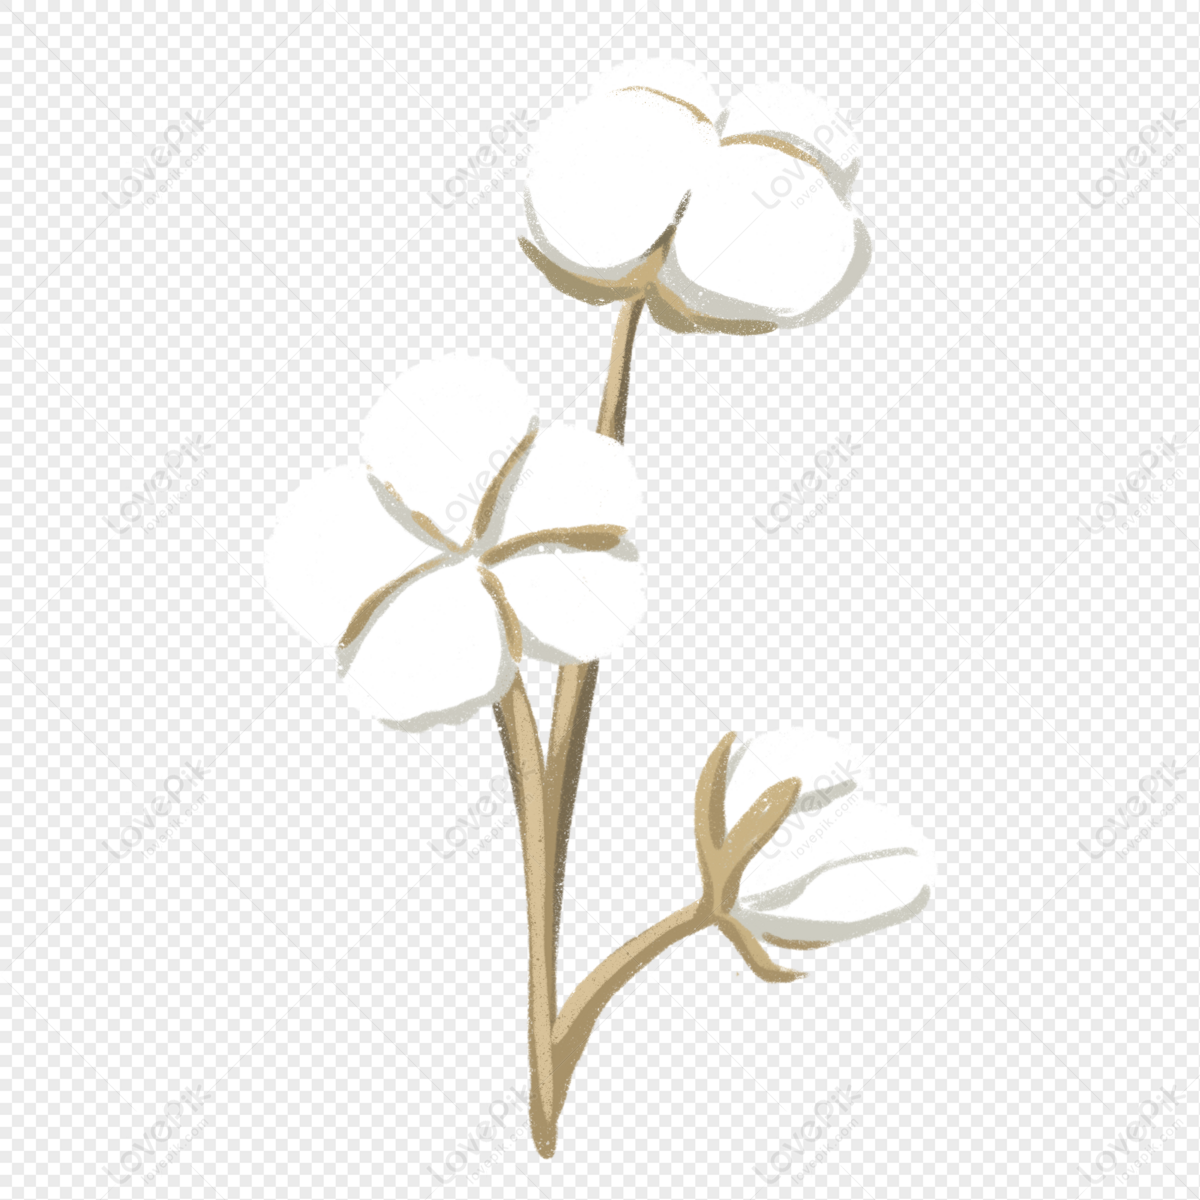 Cotton Free PNG And Clipart Image For Free Download - Lovepik | 401308999